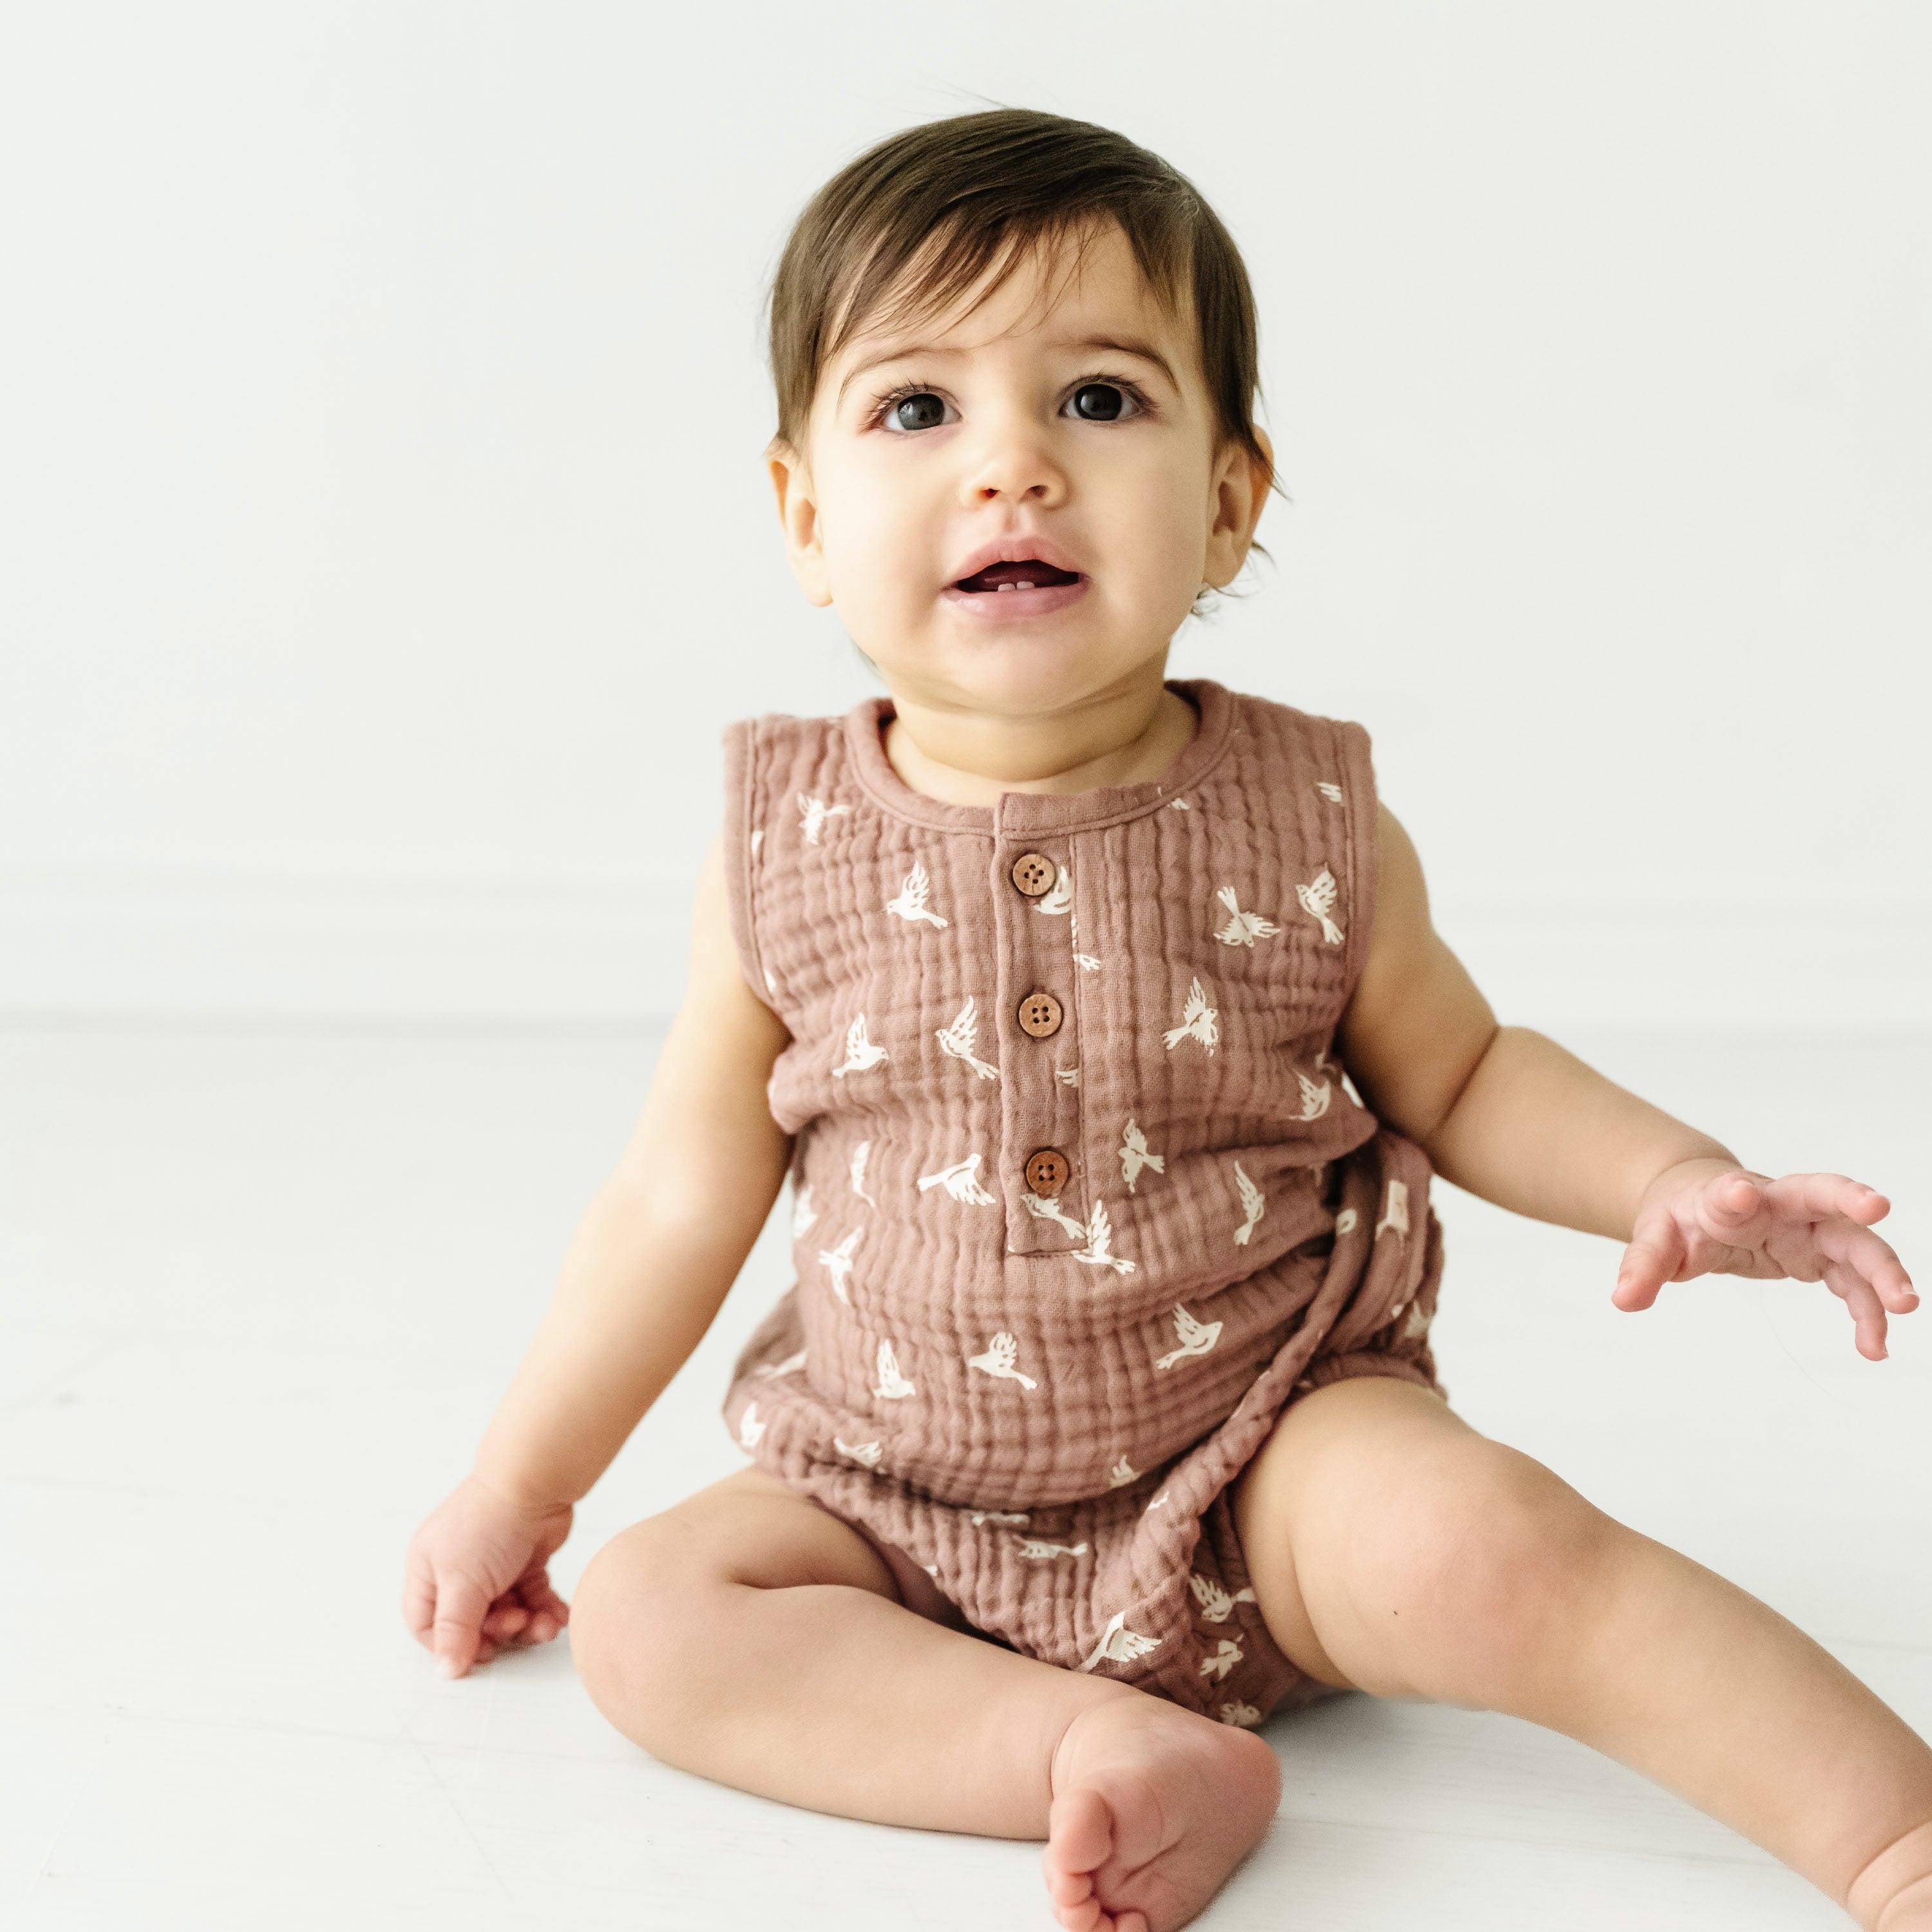 A toddler with brown hair and large eyes sits on a white surface, wearing a Makemake Organics Organic Muslin Bubble Onesie in Flock, with tiny bird patterns, looking slightly upwards with an inquisitive expression.